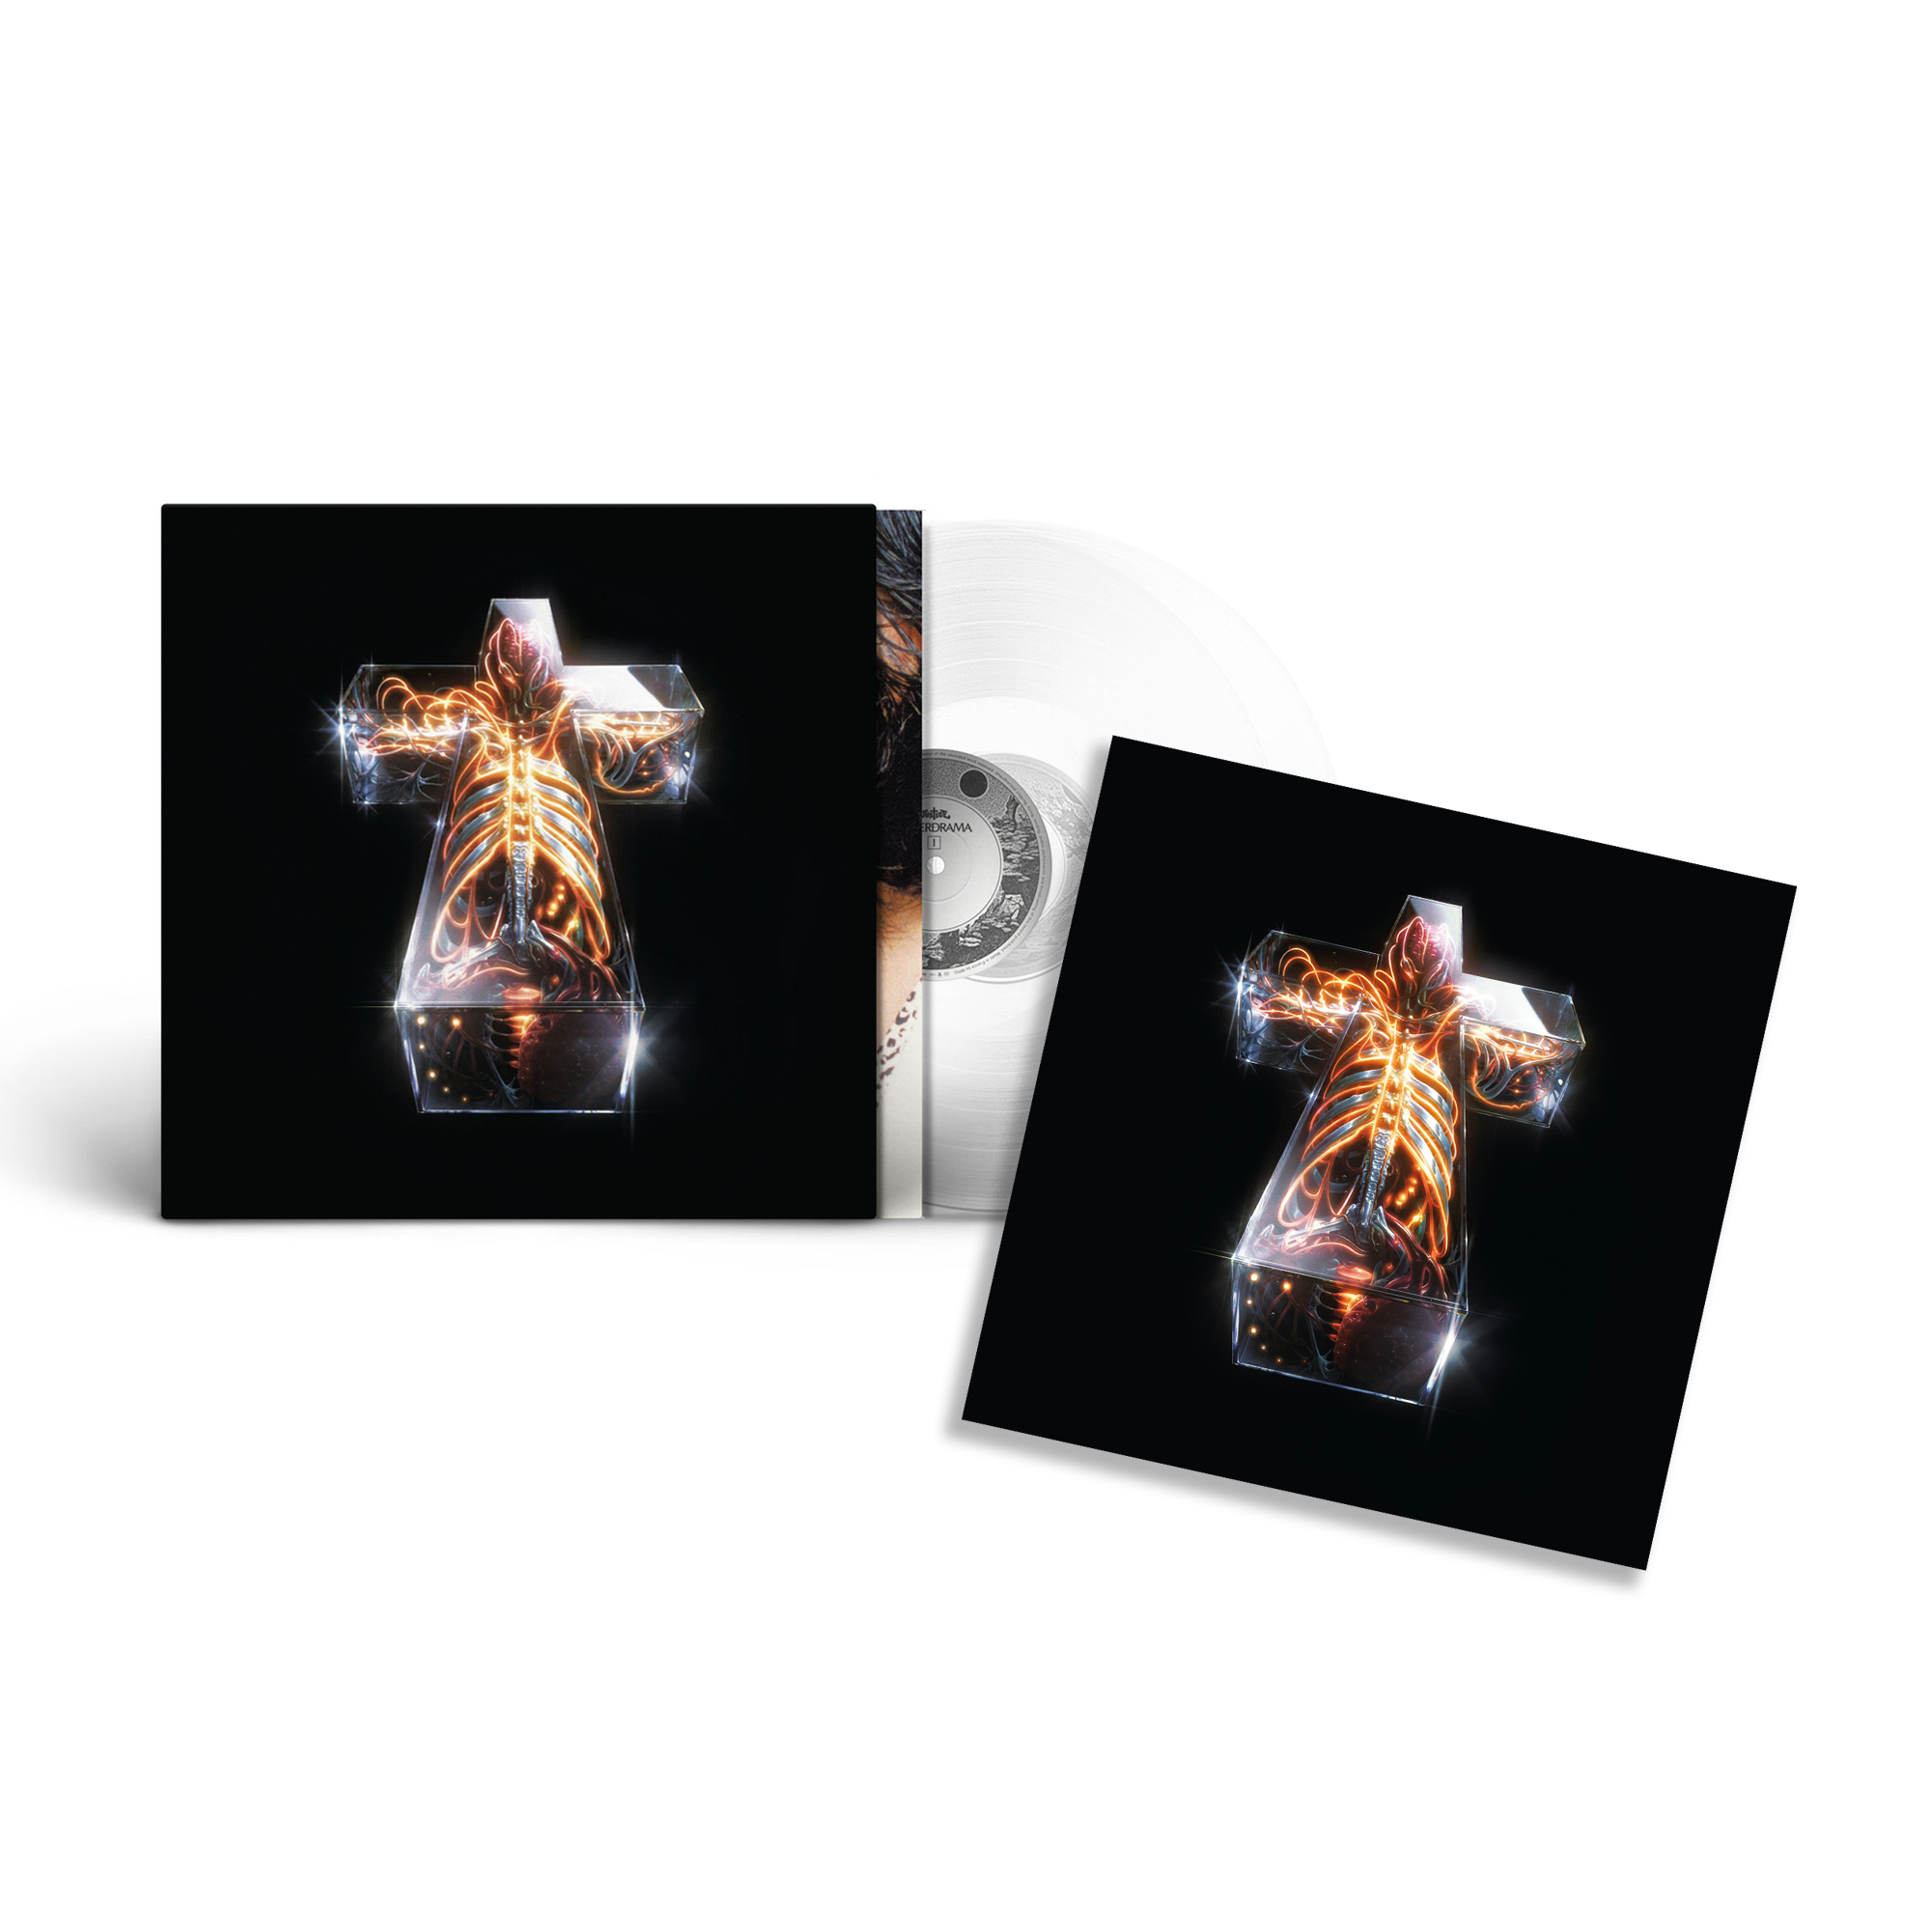 Hyperdrama: Limited Crystal Clear Vinyl 2LP + Exclusive 12x12" Art Print [100 Only]